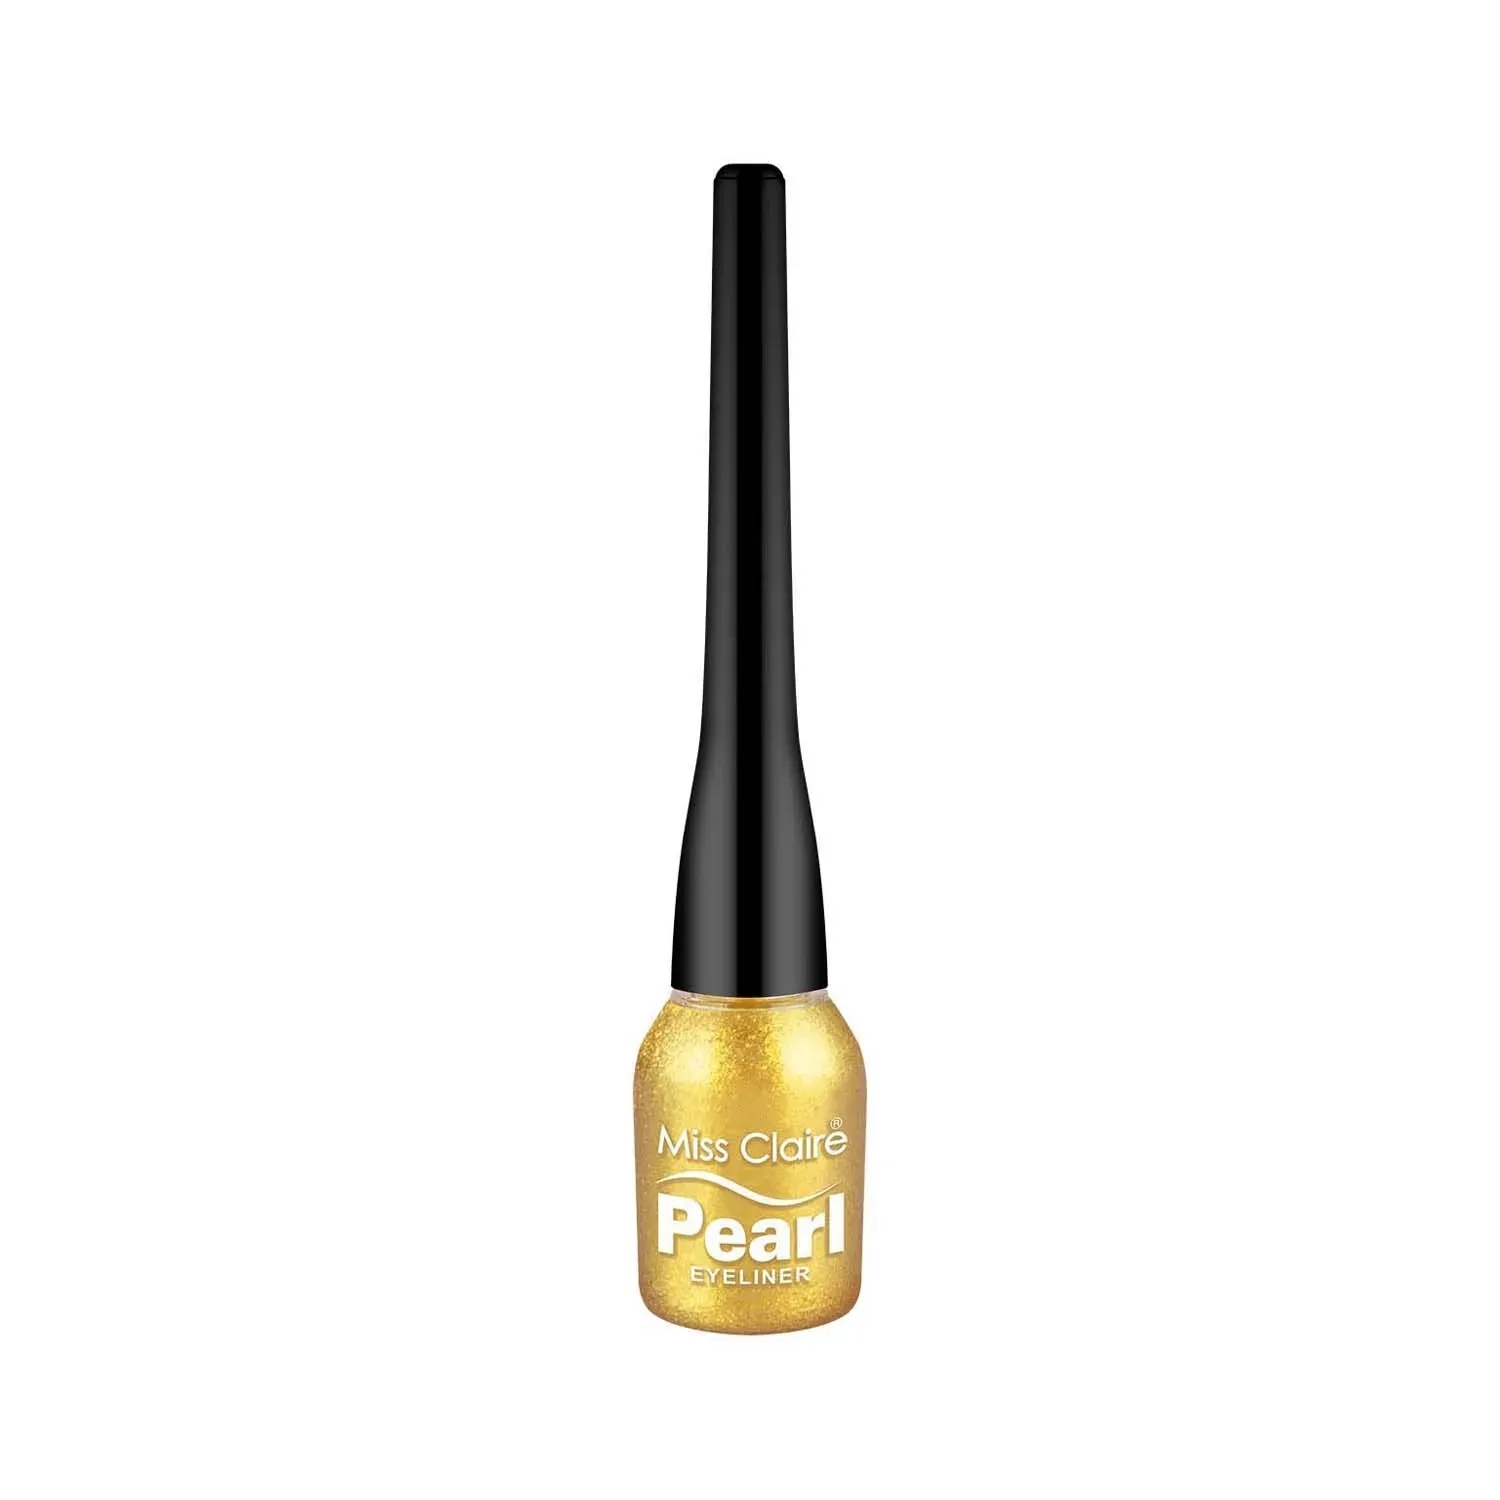 Miss Claire | Miss Claire Pearl Eyeliner - 08 Gold (5g)